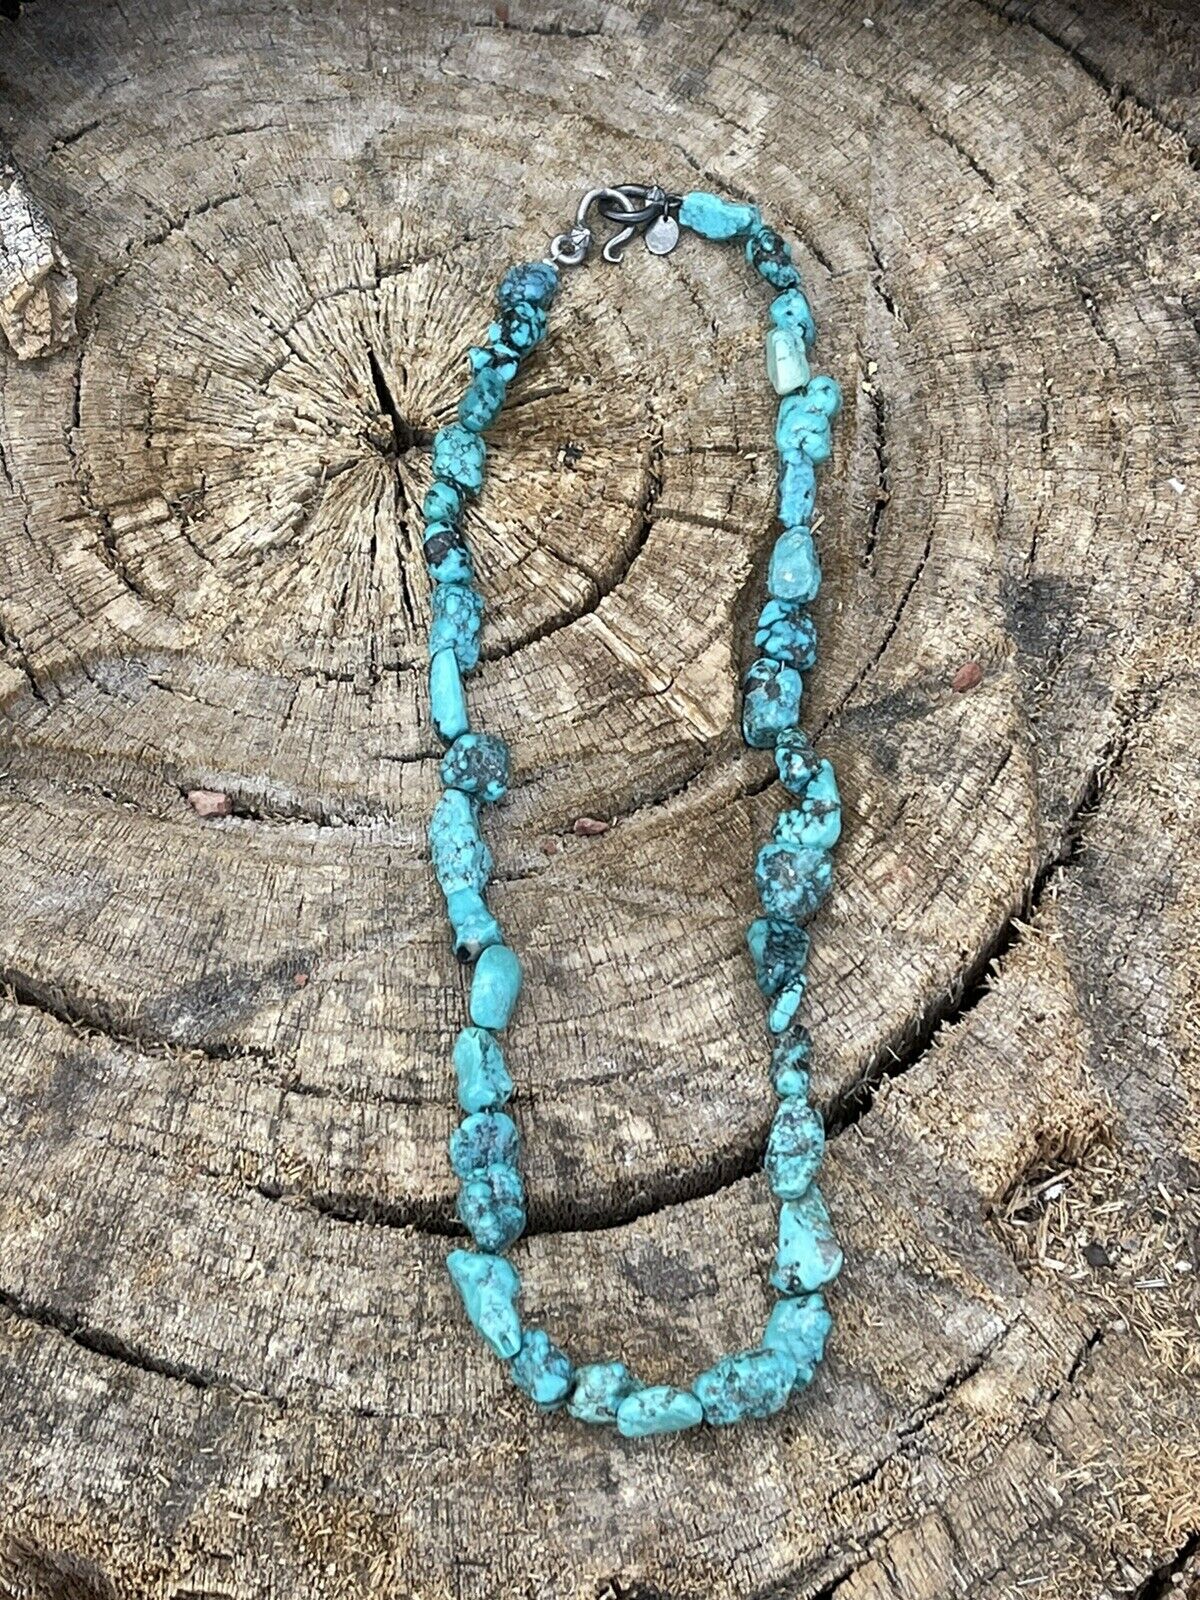 Sterling Silver Beaded Turquoise Necklace 18 Inch